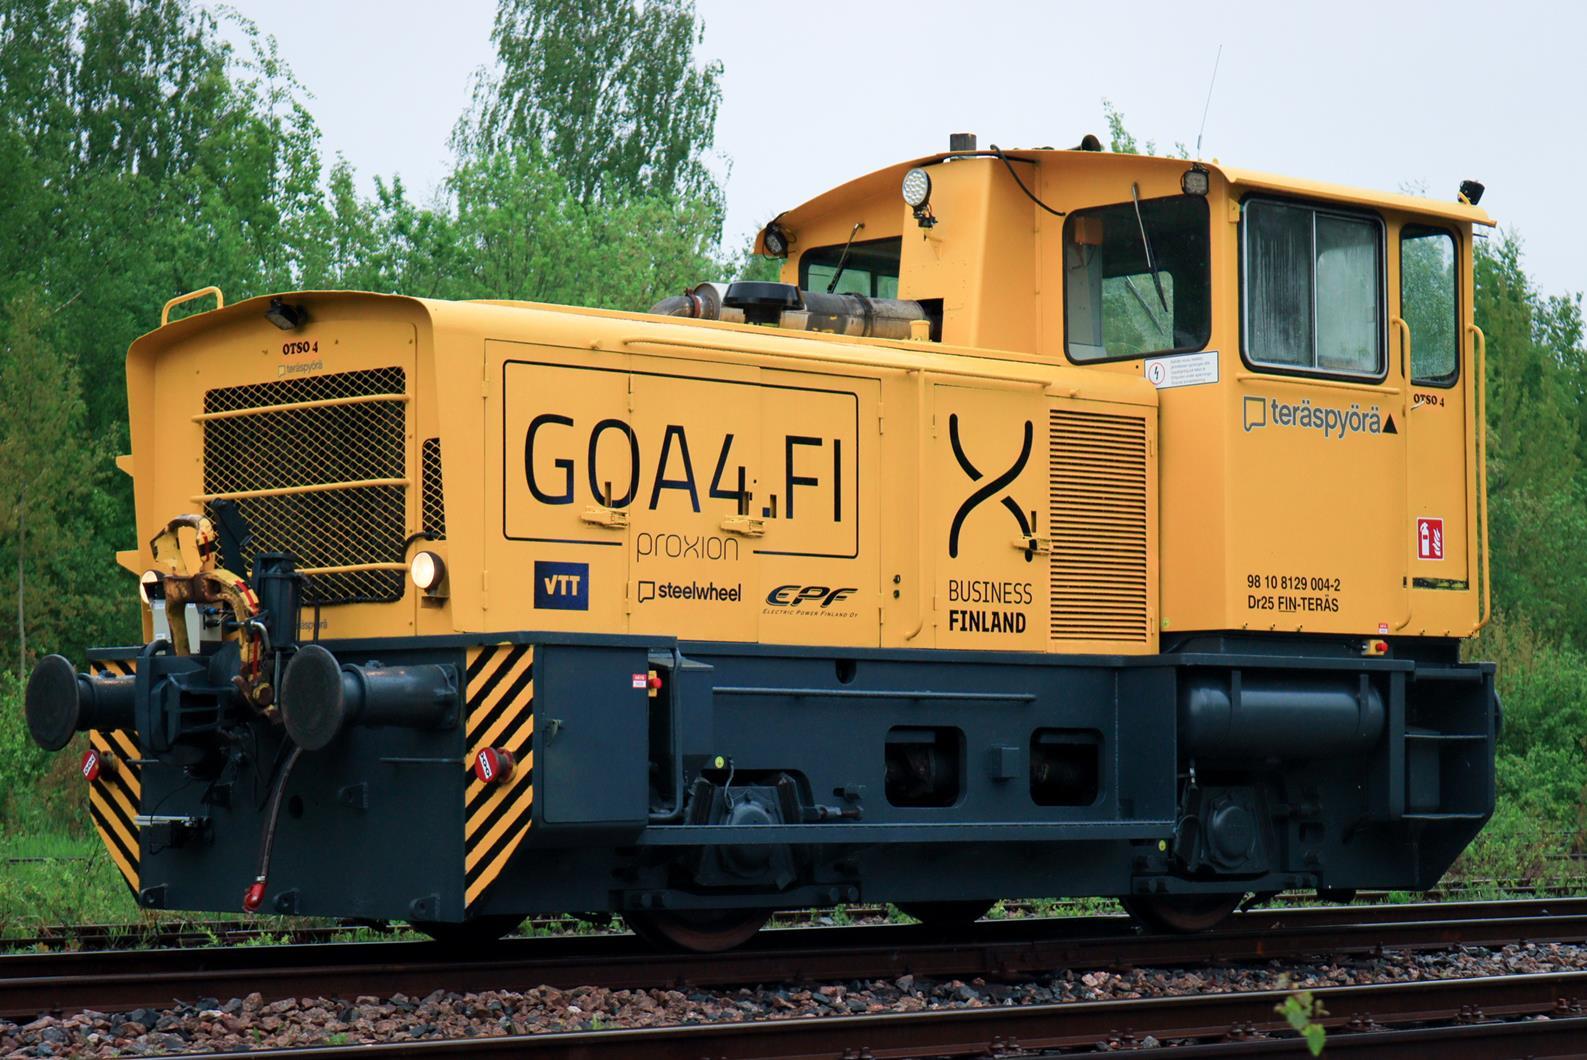 An automated shunter on test in the Voikkaa industrial area, Finland